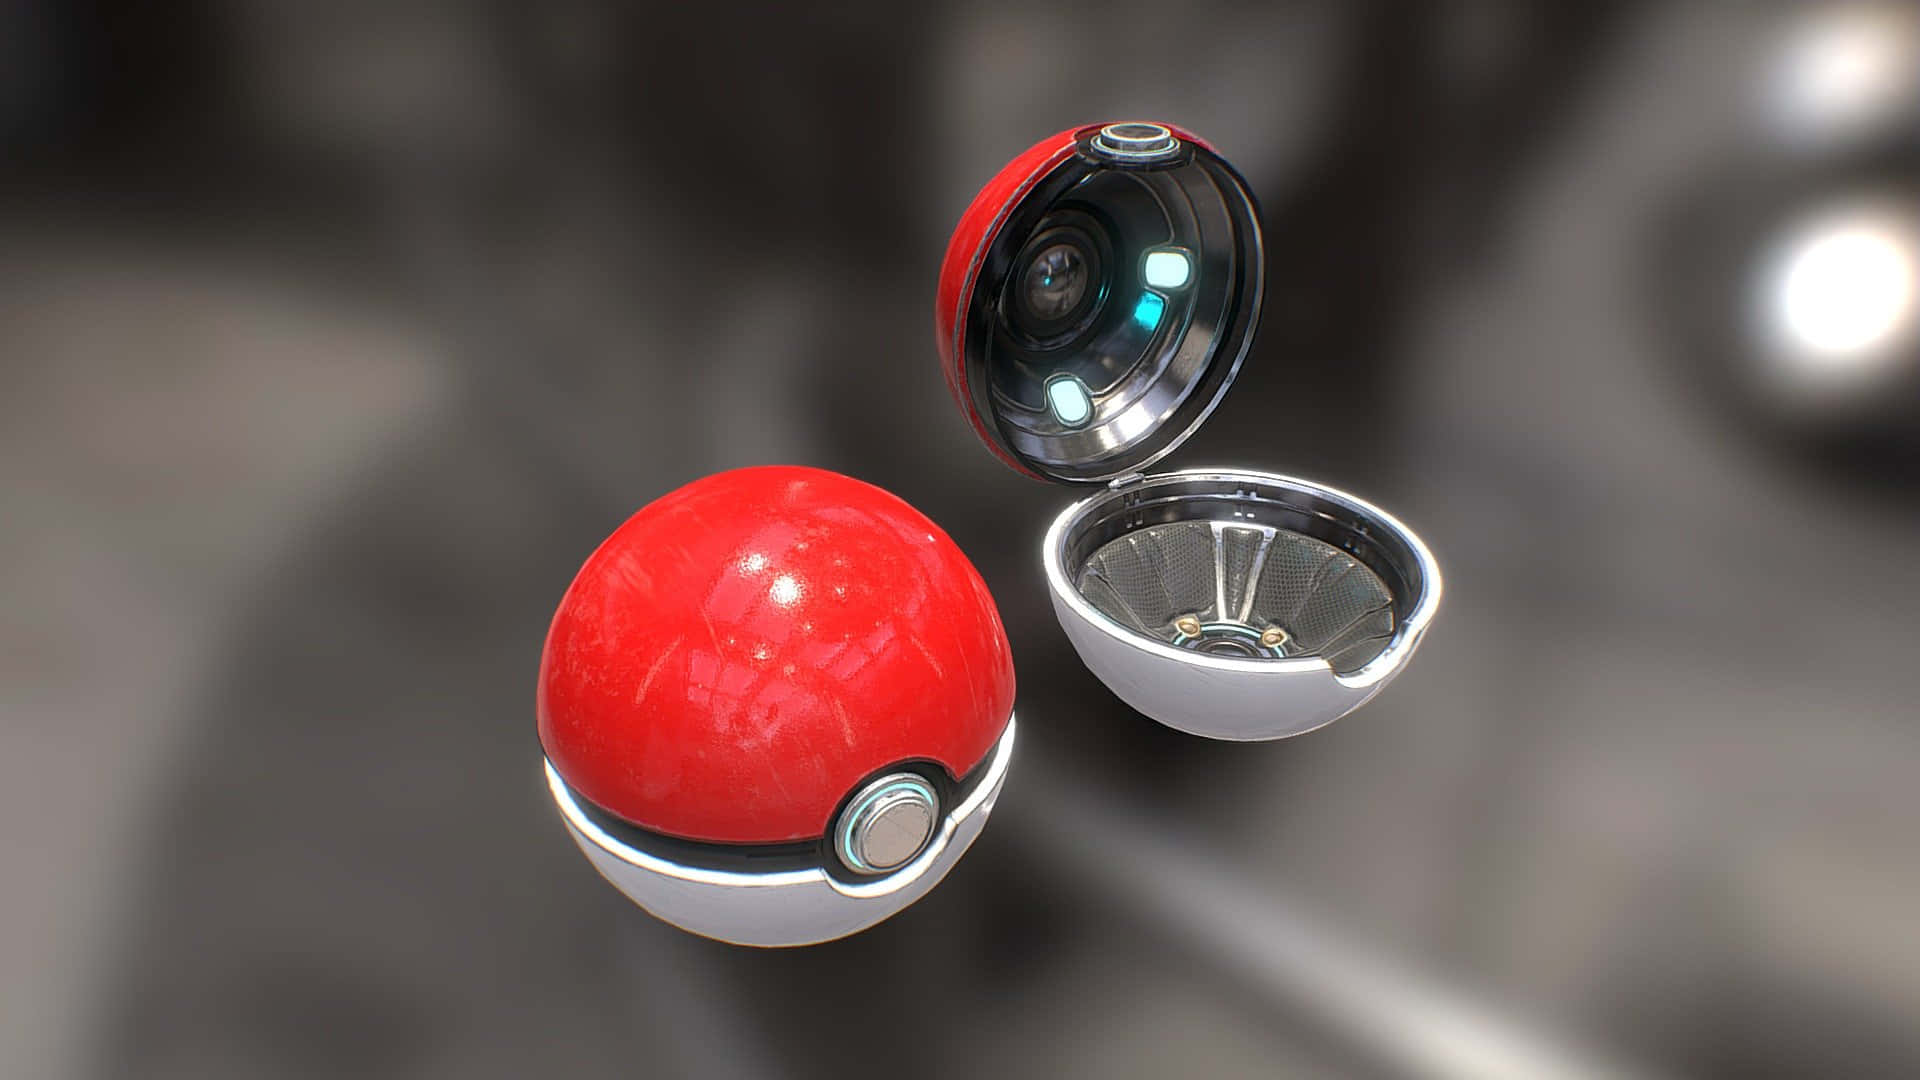 Throw the Pokeball to Catch Them All!